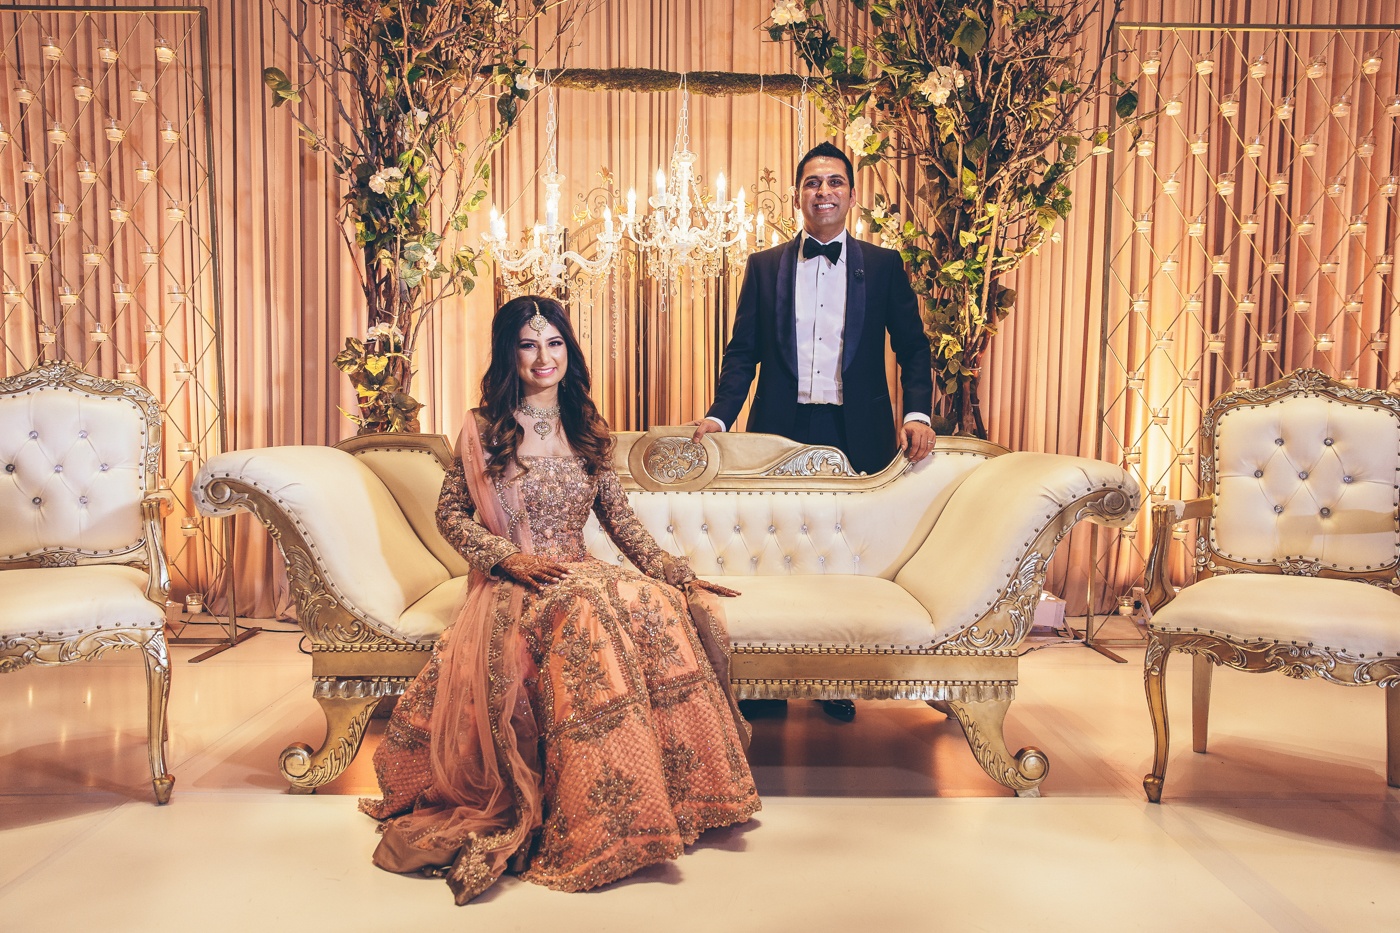 Top 13 Indian Wedding Reception Entrance Songs for Couples